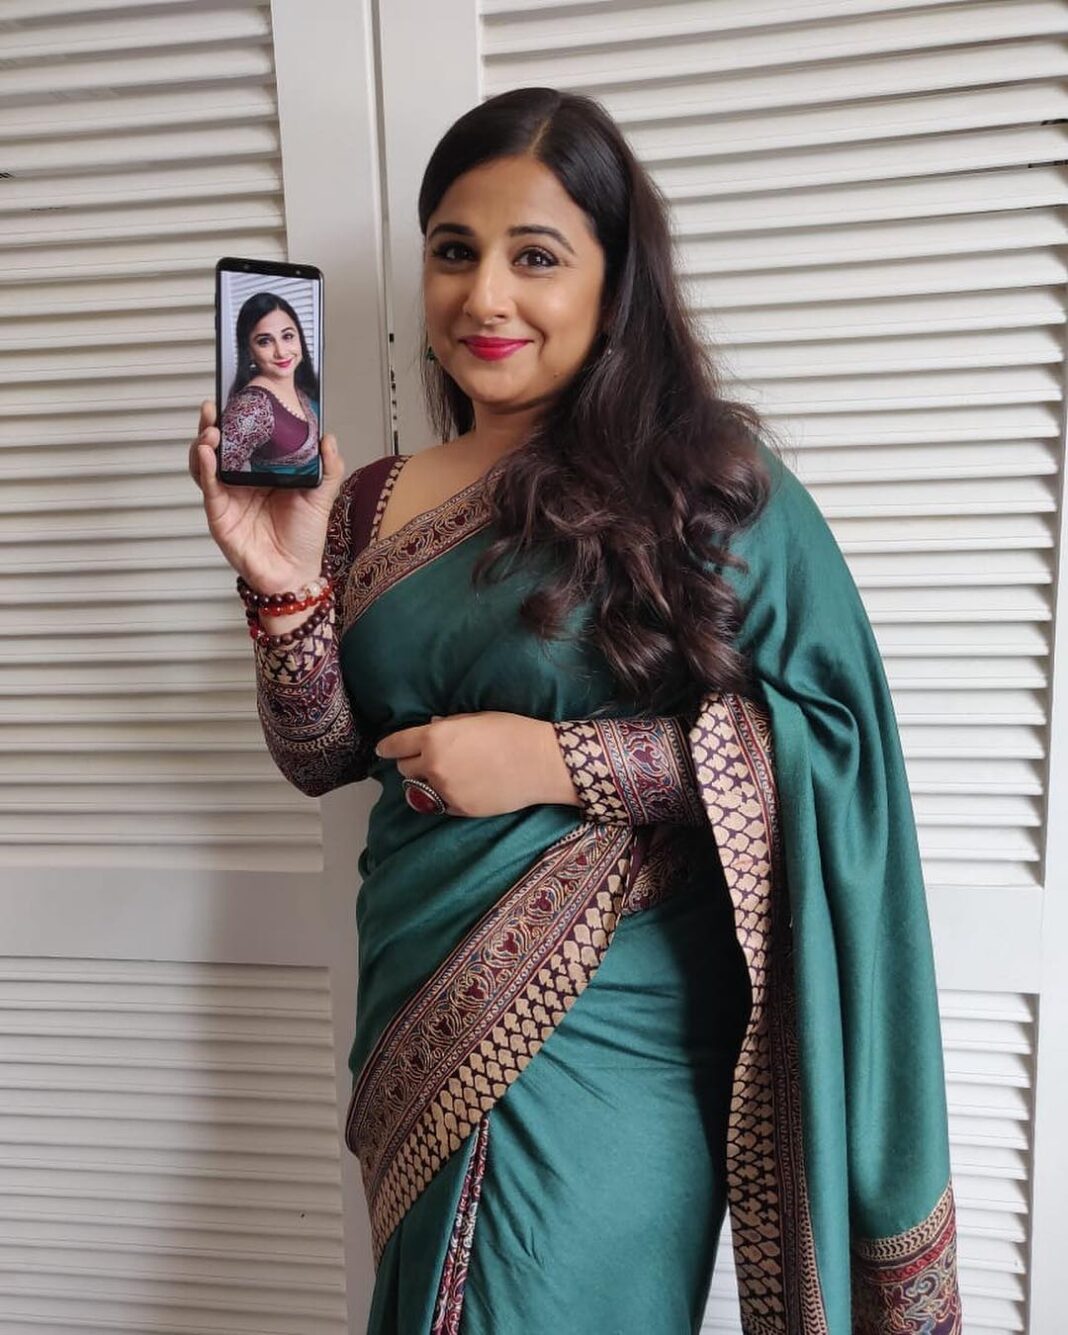 Vidya Balan Instagram - Loving the all-new #GalaxyOn8, as its Dual Rear Camera with Live Focus helps me blur the background and highlight what matters the most. @samsungindia #AlwaysOn #DualRearCamera